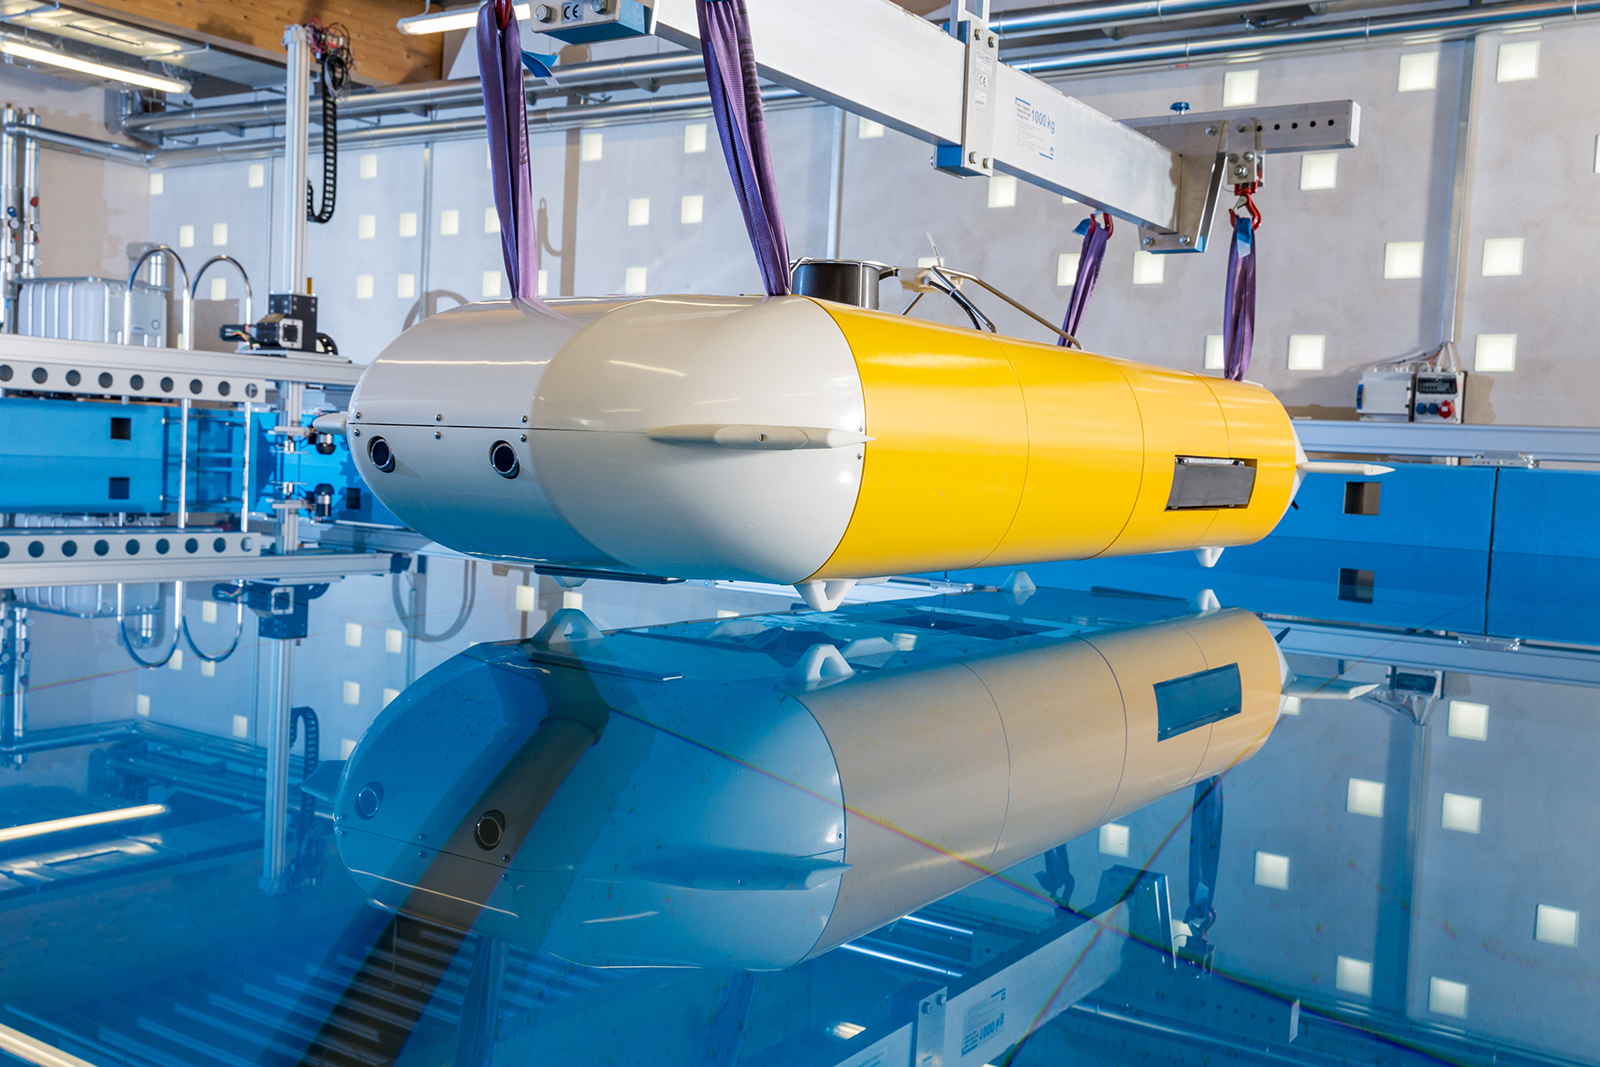 The AUV weighs less than 700 kilograms, making it a truly lightweight vehicle.